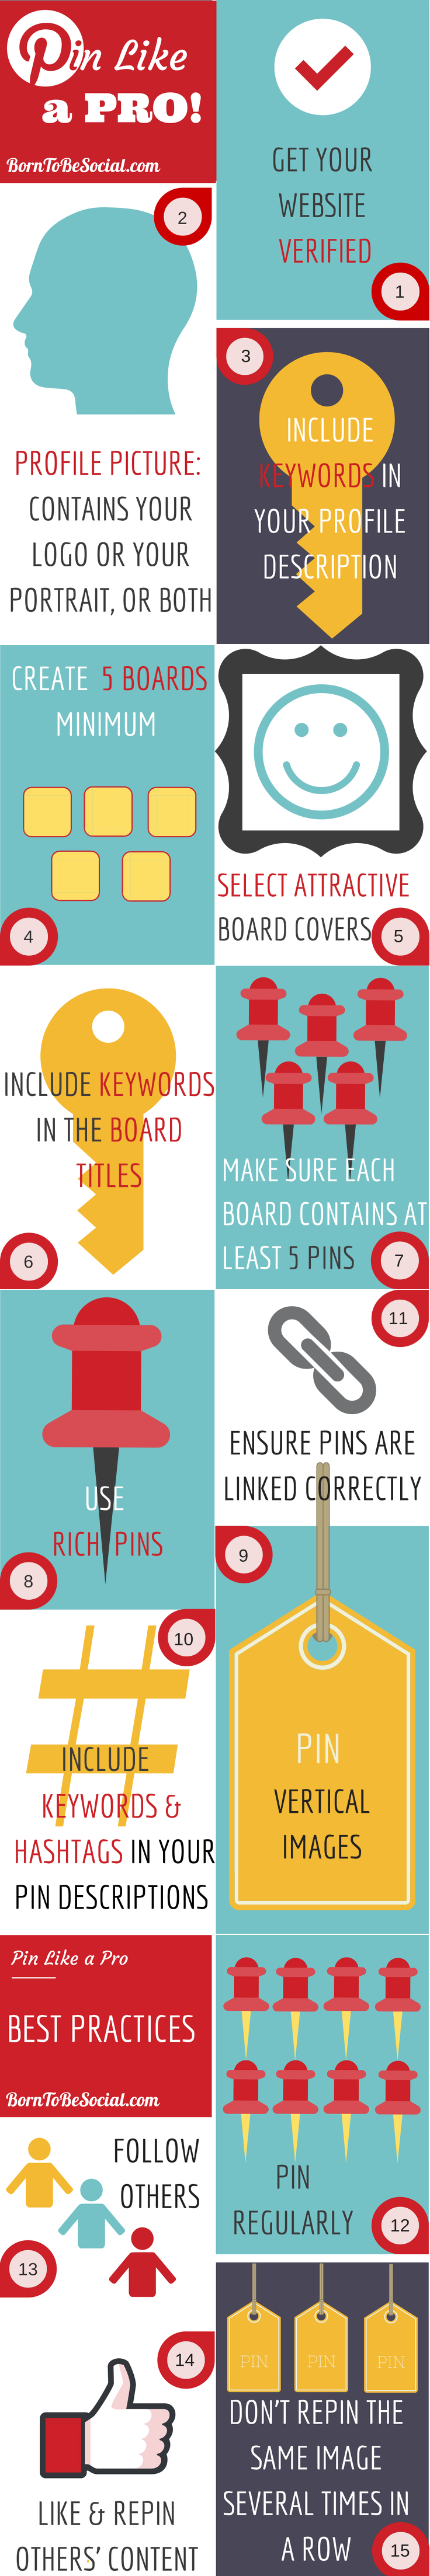 Pin Like a Pro! - 15 Practical Tips To Get Started [Infographic]